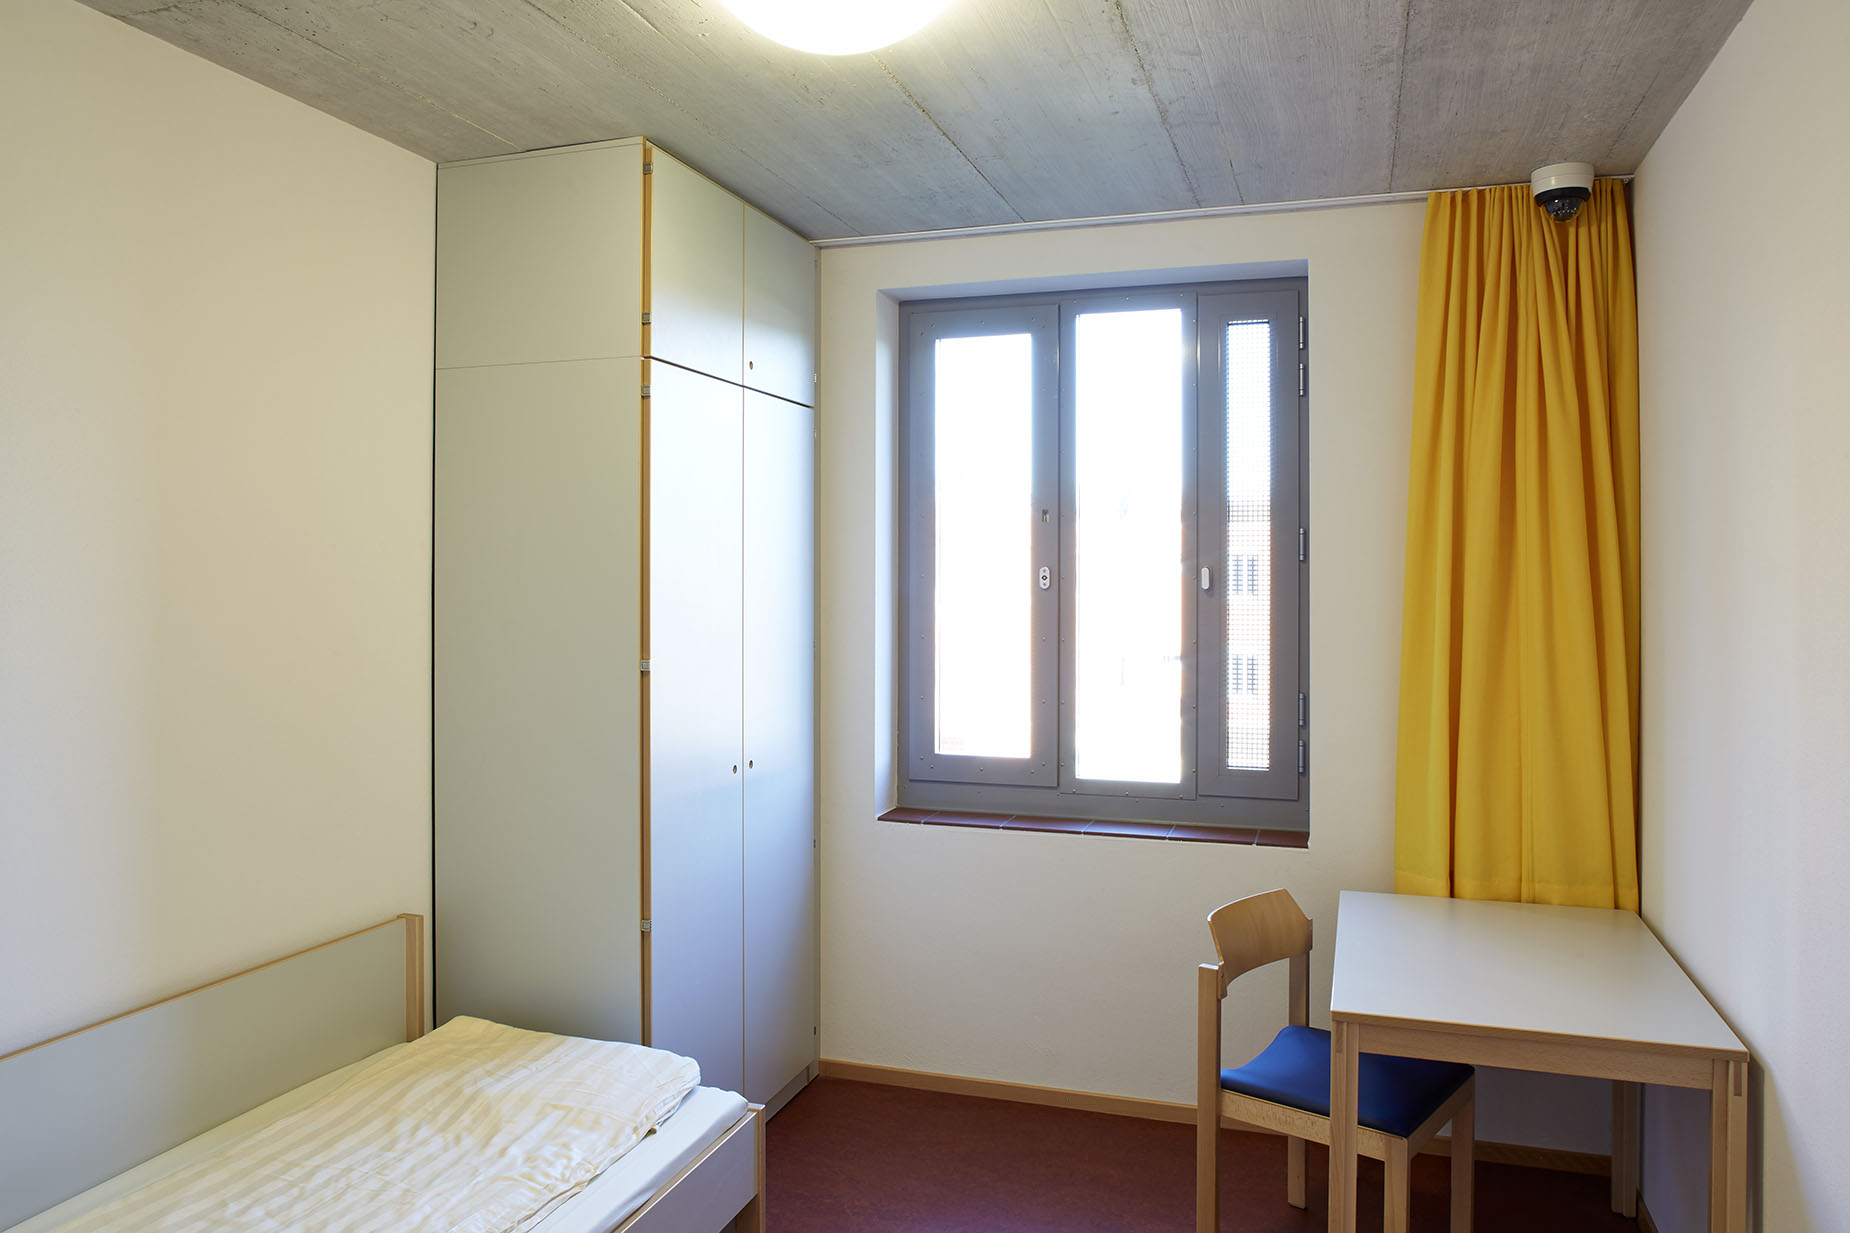 New Construction, Maximum Security Area of a Forensic Psychiatric Hospital in Göttingen and Heat Supply for the Juvenile Institution in Leineberg